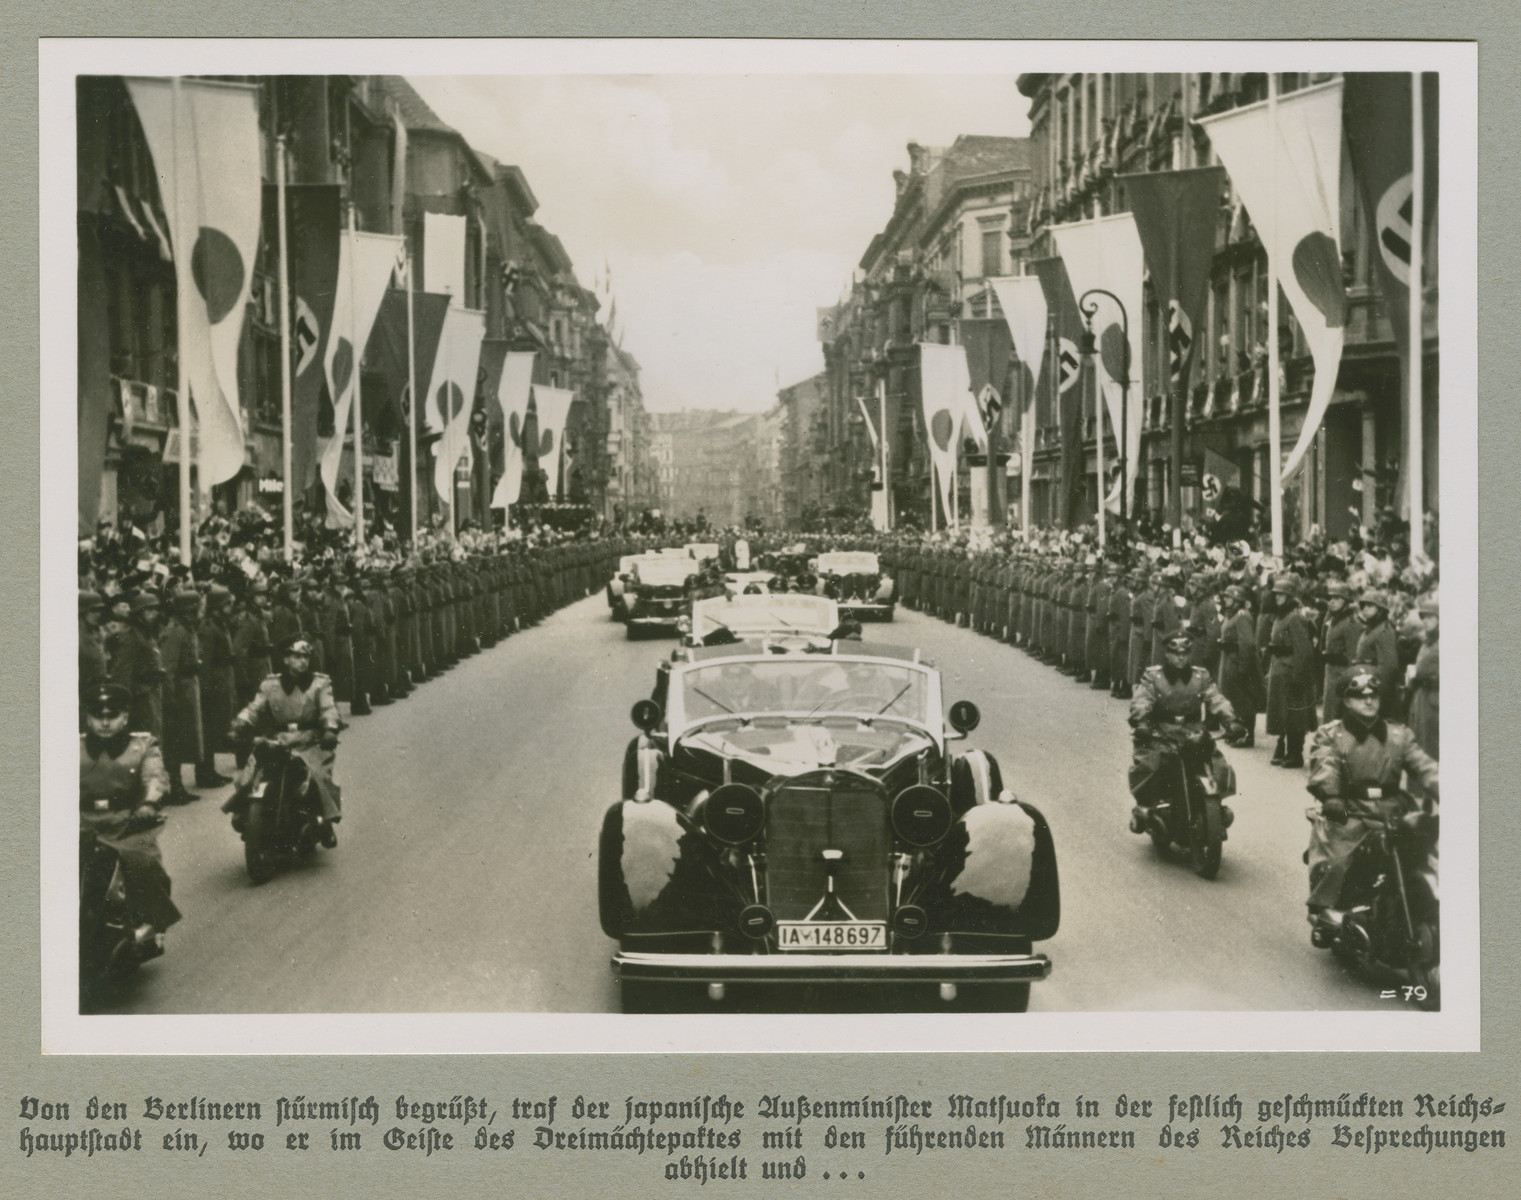 A motorcade proceeds down a Berlin street lined with Japanese and Nazi flags.

The original caption reads:  Welcomed enthusiastically by the people of Berlin, the Japanese Foreign Minister Matsuoka arrives in the festively adorned capital  where he met and held talks with the Reich's leading men as a representative of the Tripartite Pact, and... 

(Caption continues with associated image on WS# 75979)